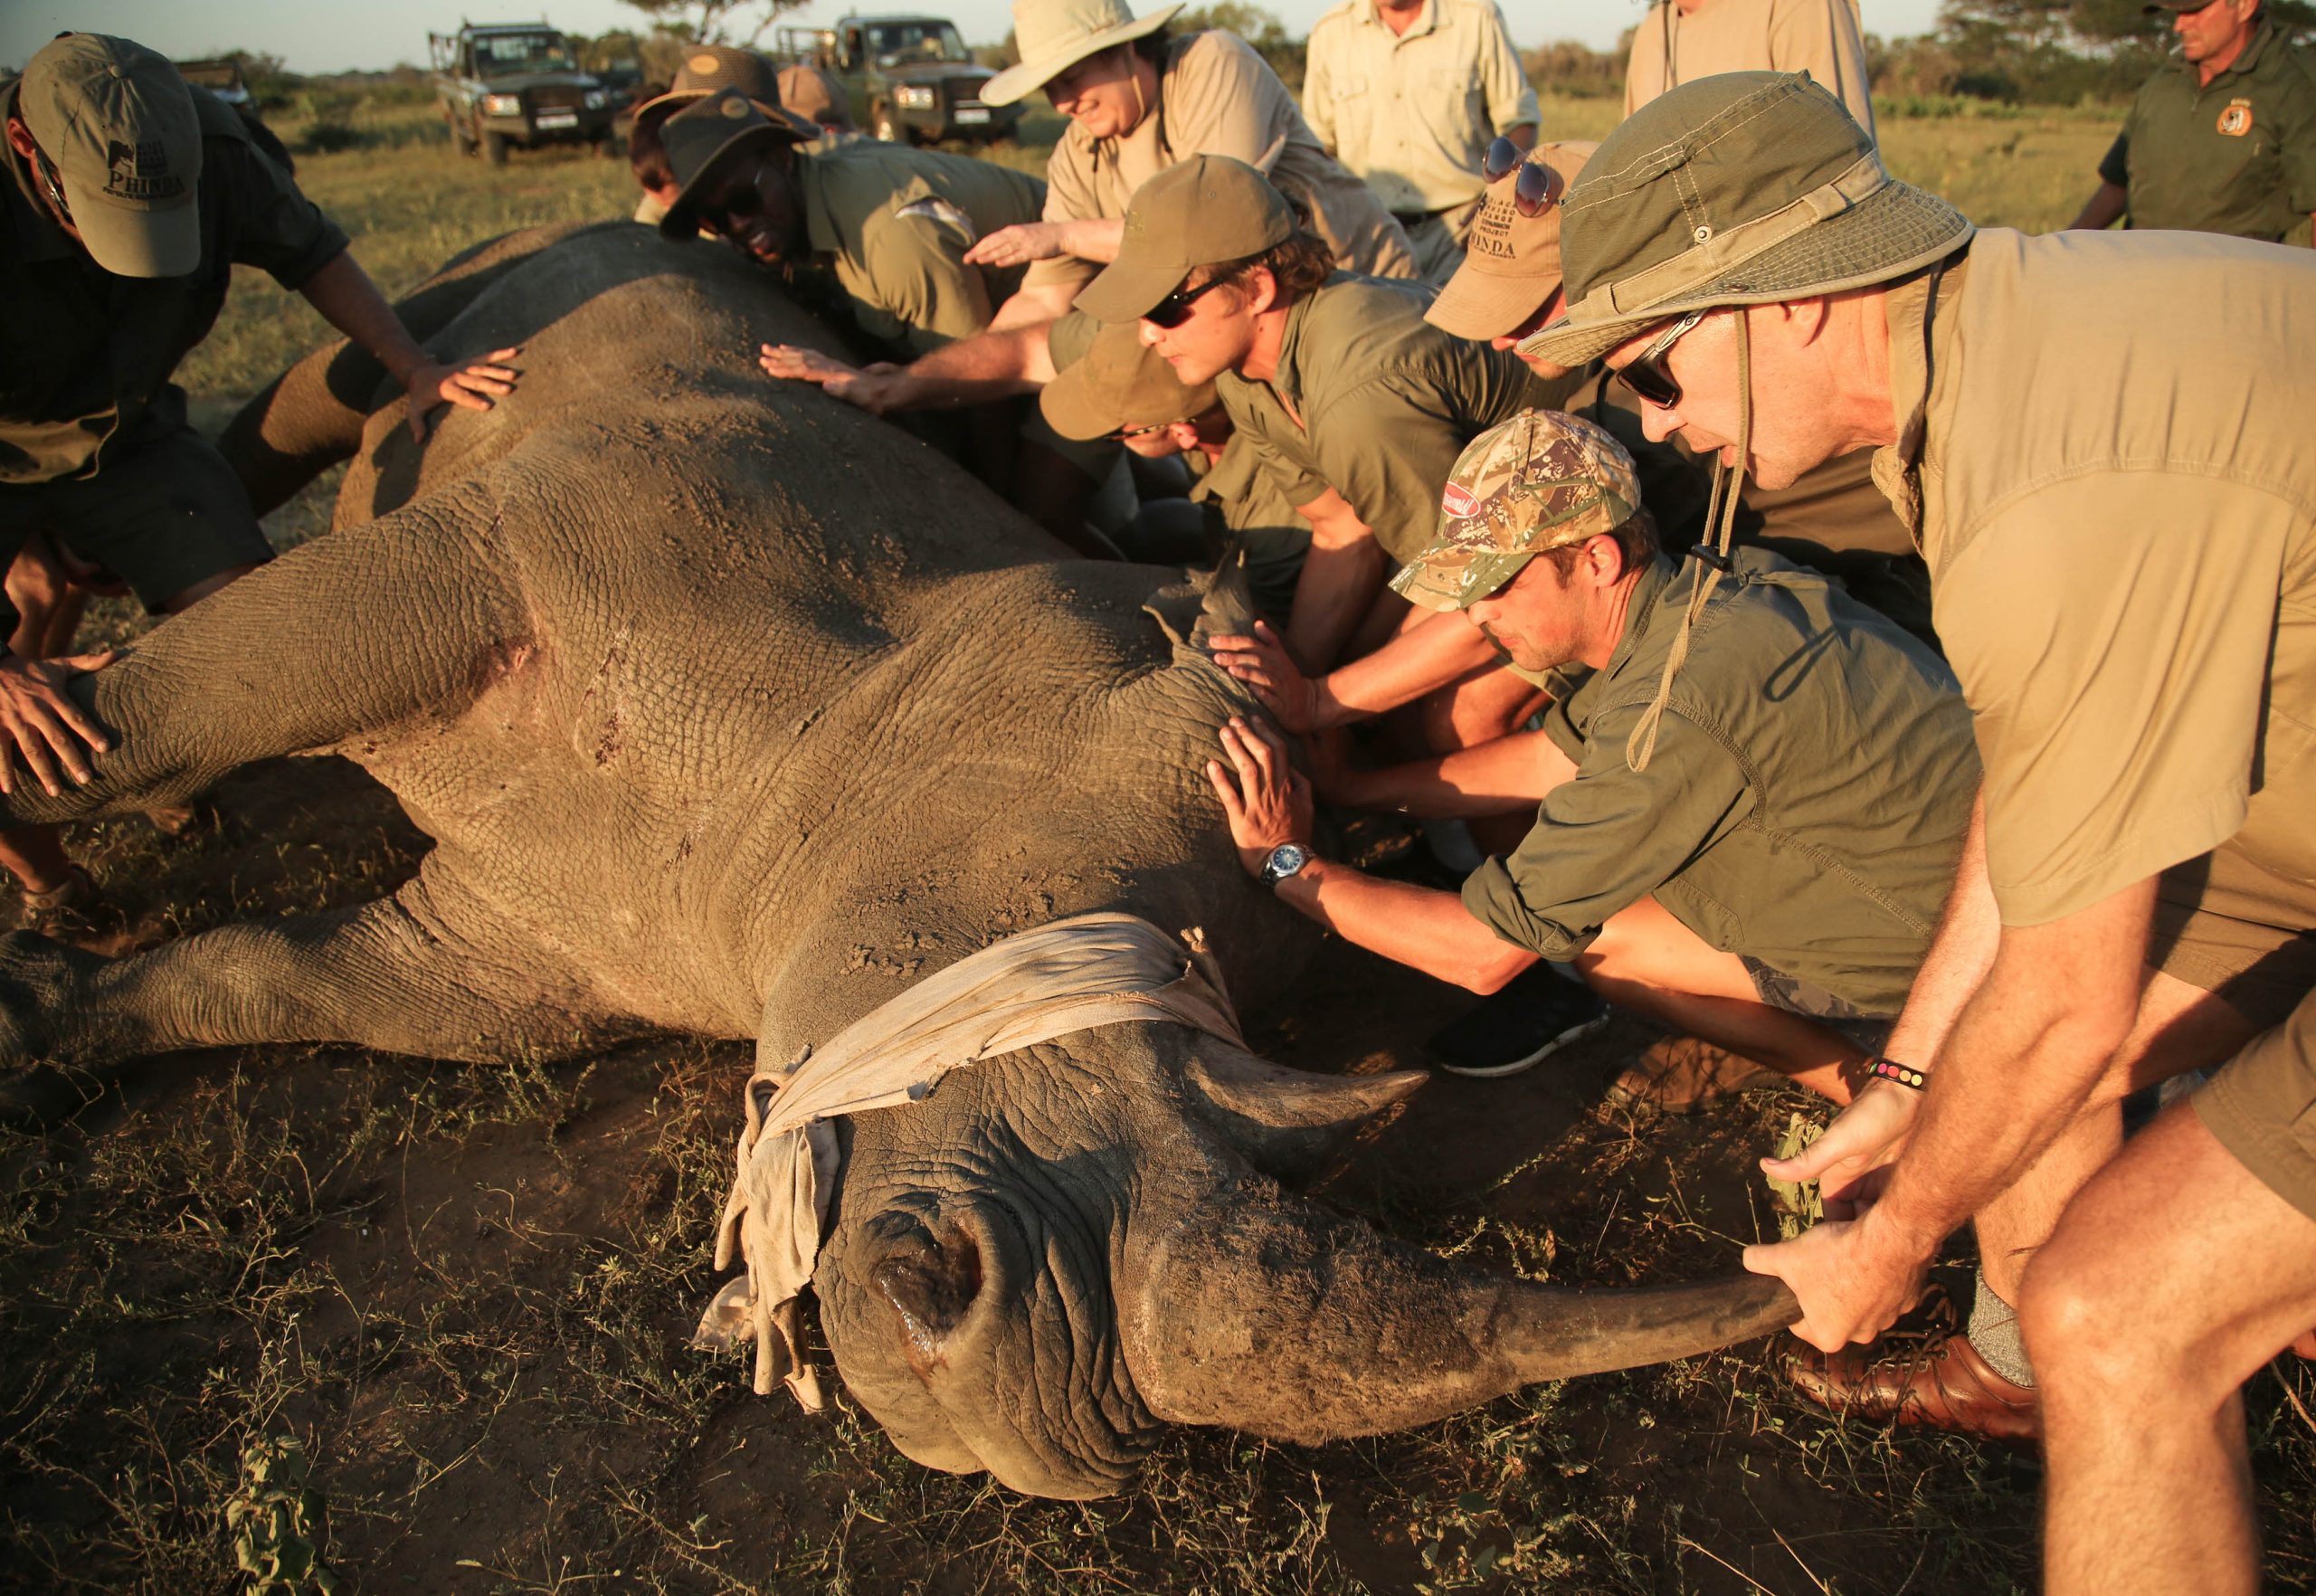 Rhino Conservation in South Africa